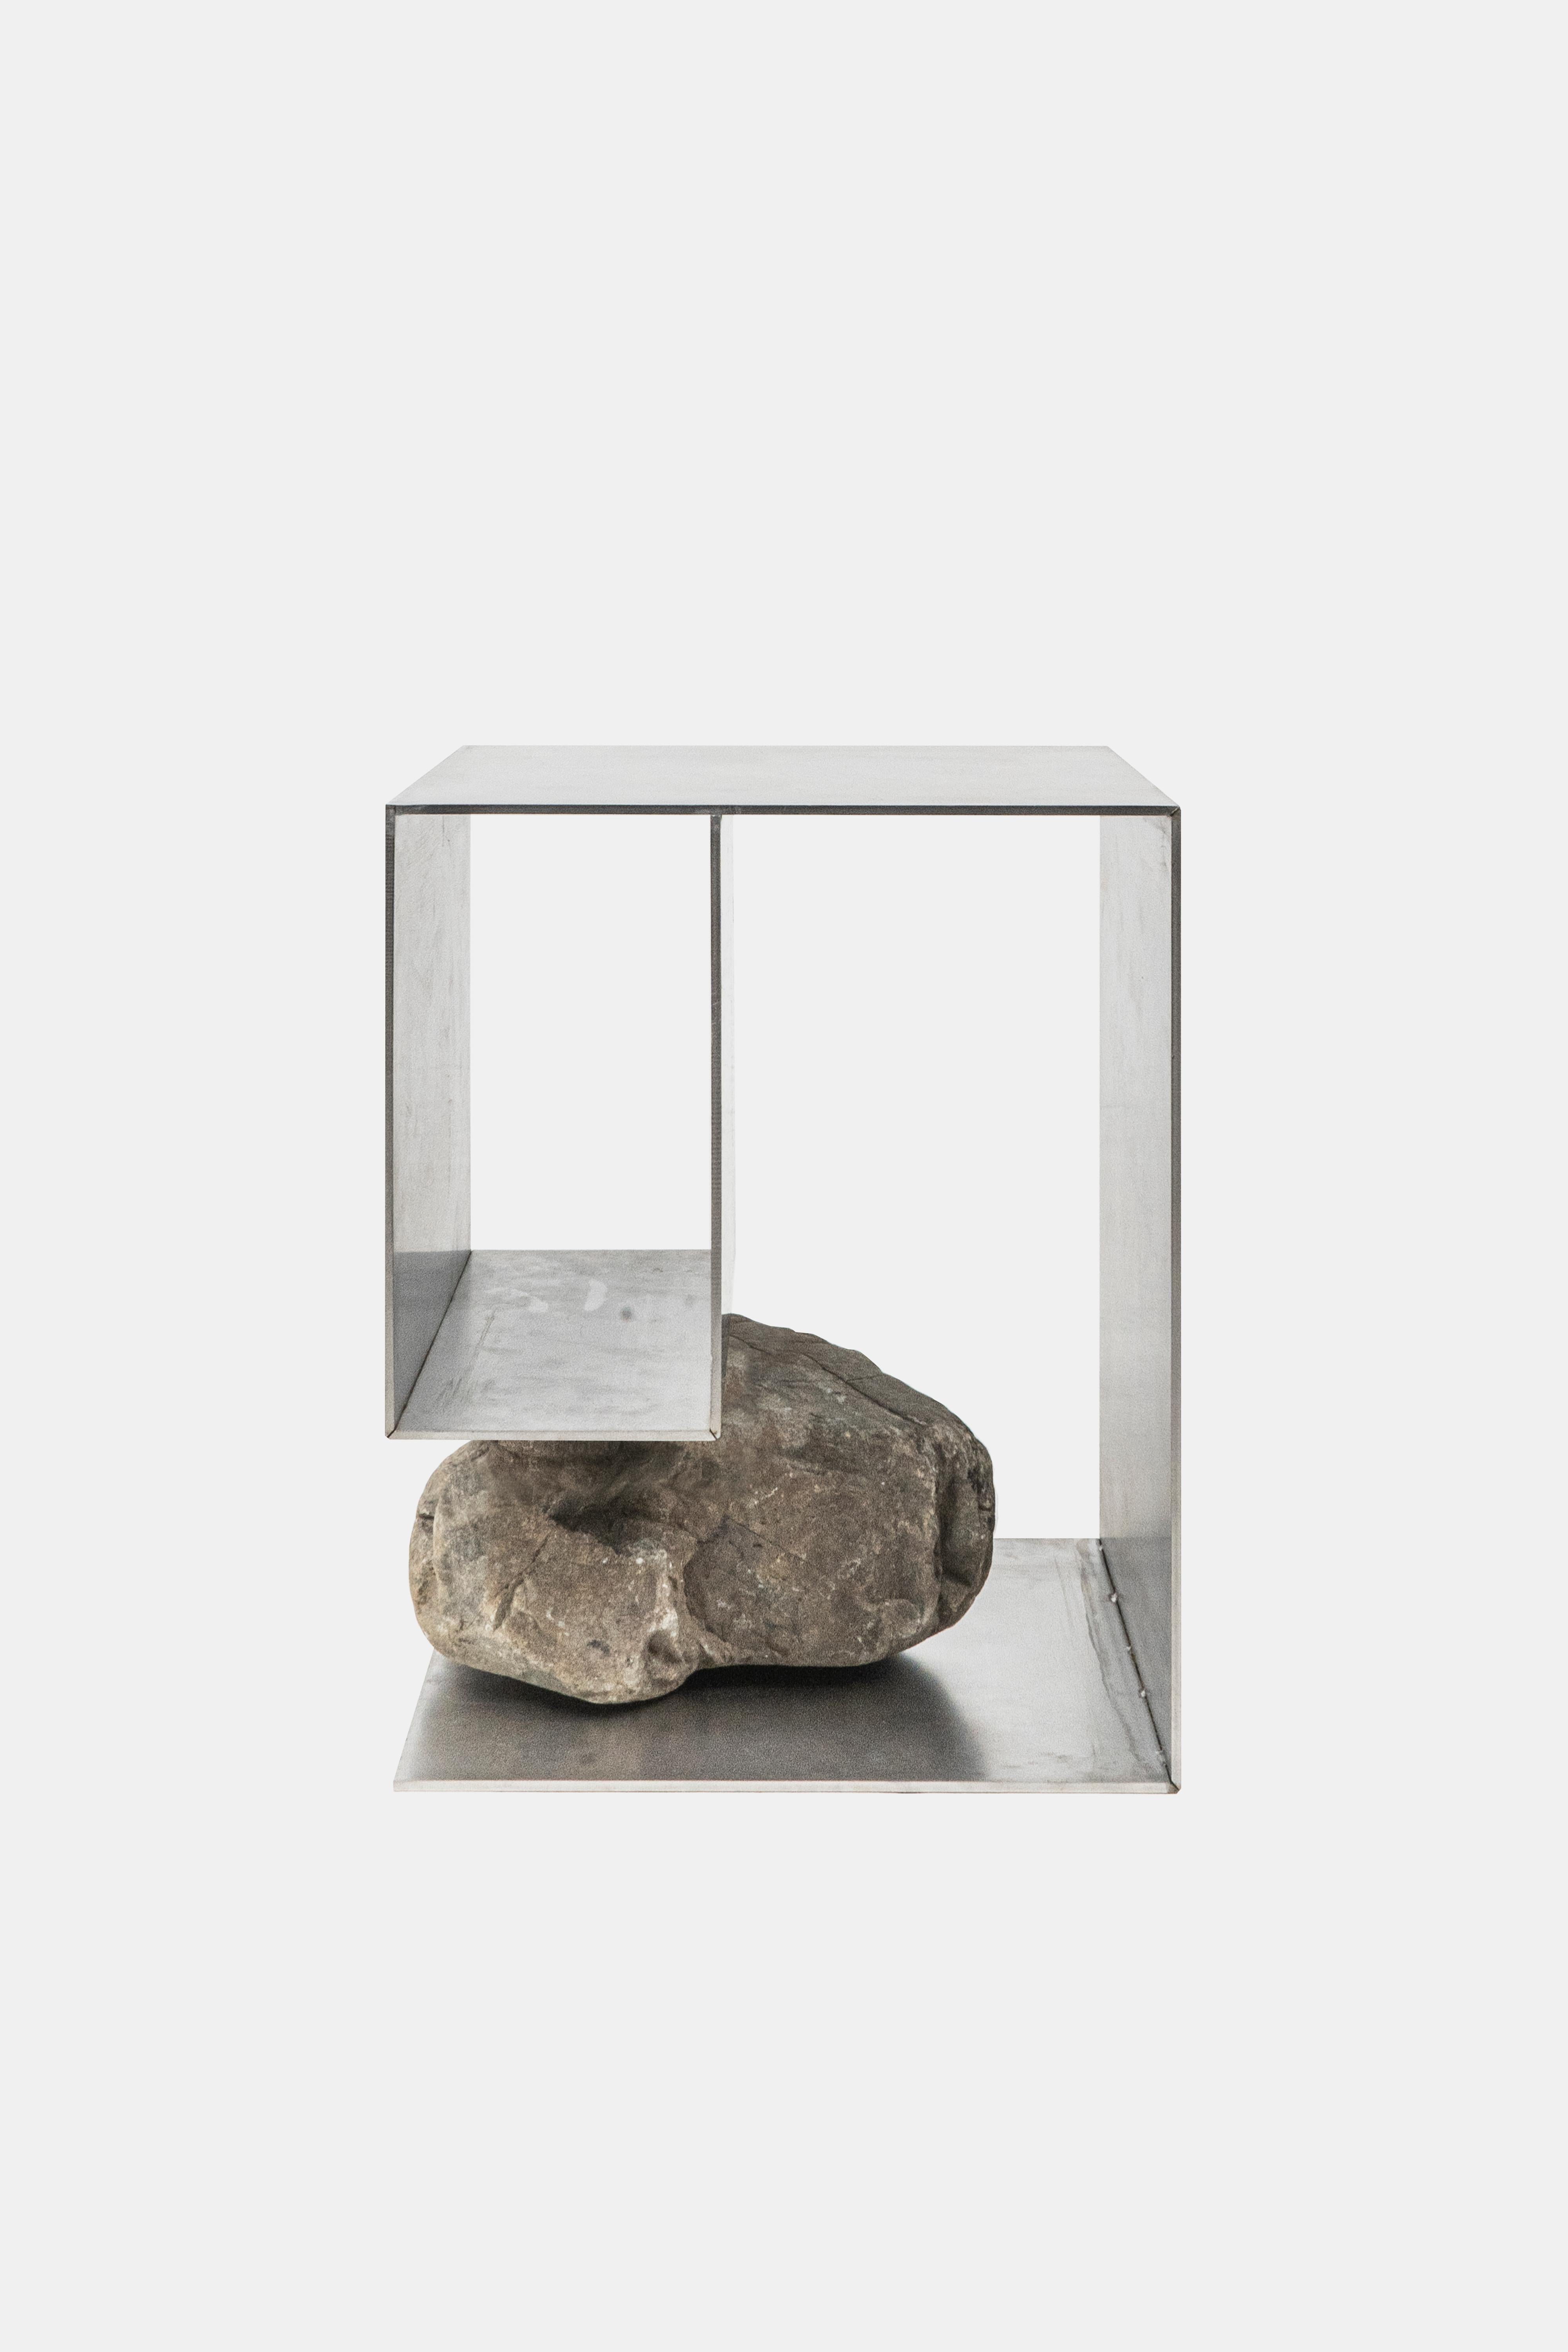 Proportions of stone stool 02 by Lee Sisan, 2019
Dimensions: W 36 x D 36 x H 45 cm.
Materials: stainless steel, natural stone.

Each piece is made to order and uses natural stones, so please expect some variability in design.

